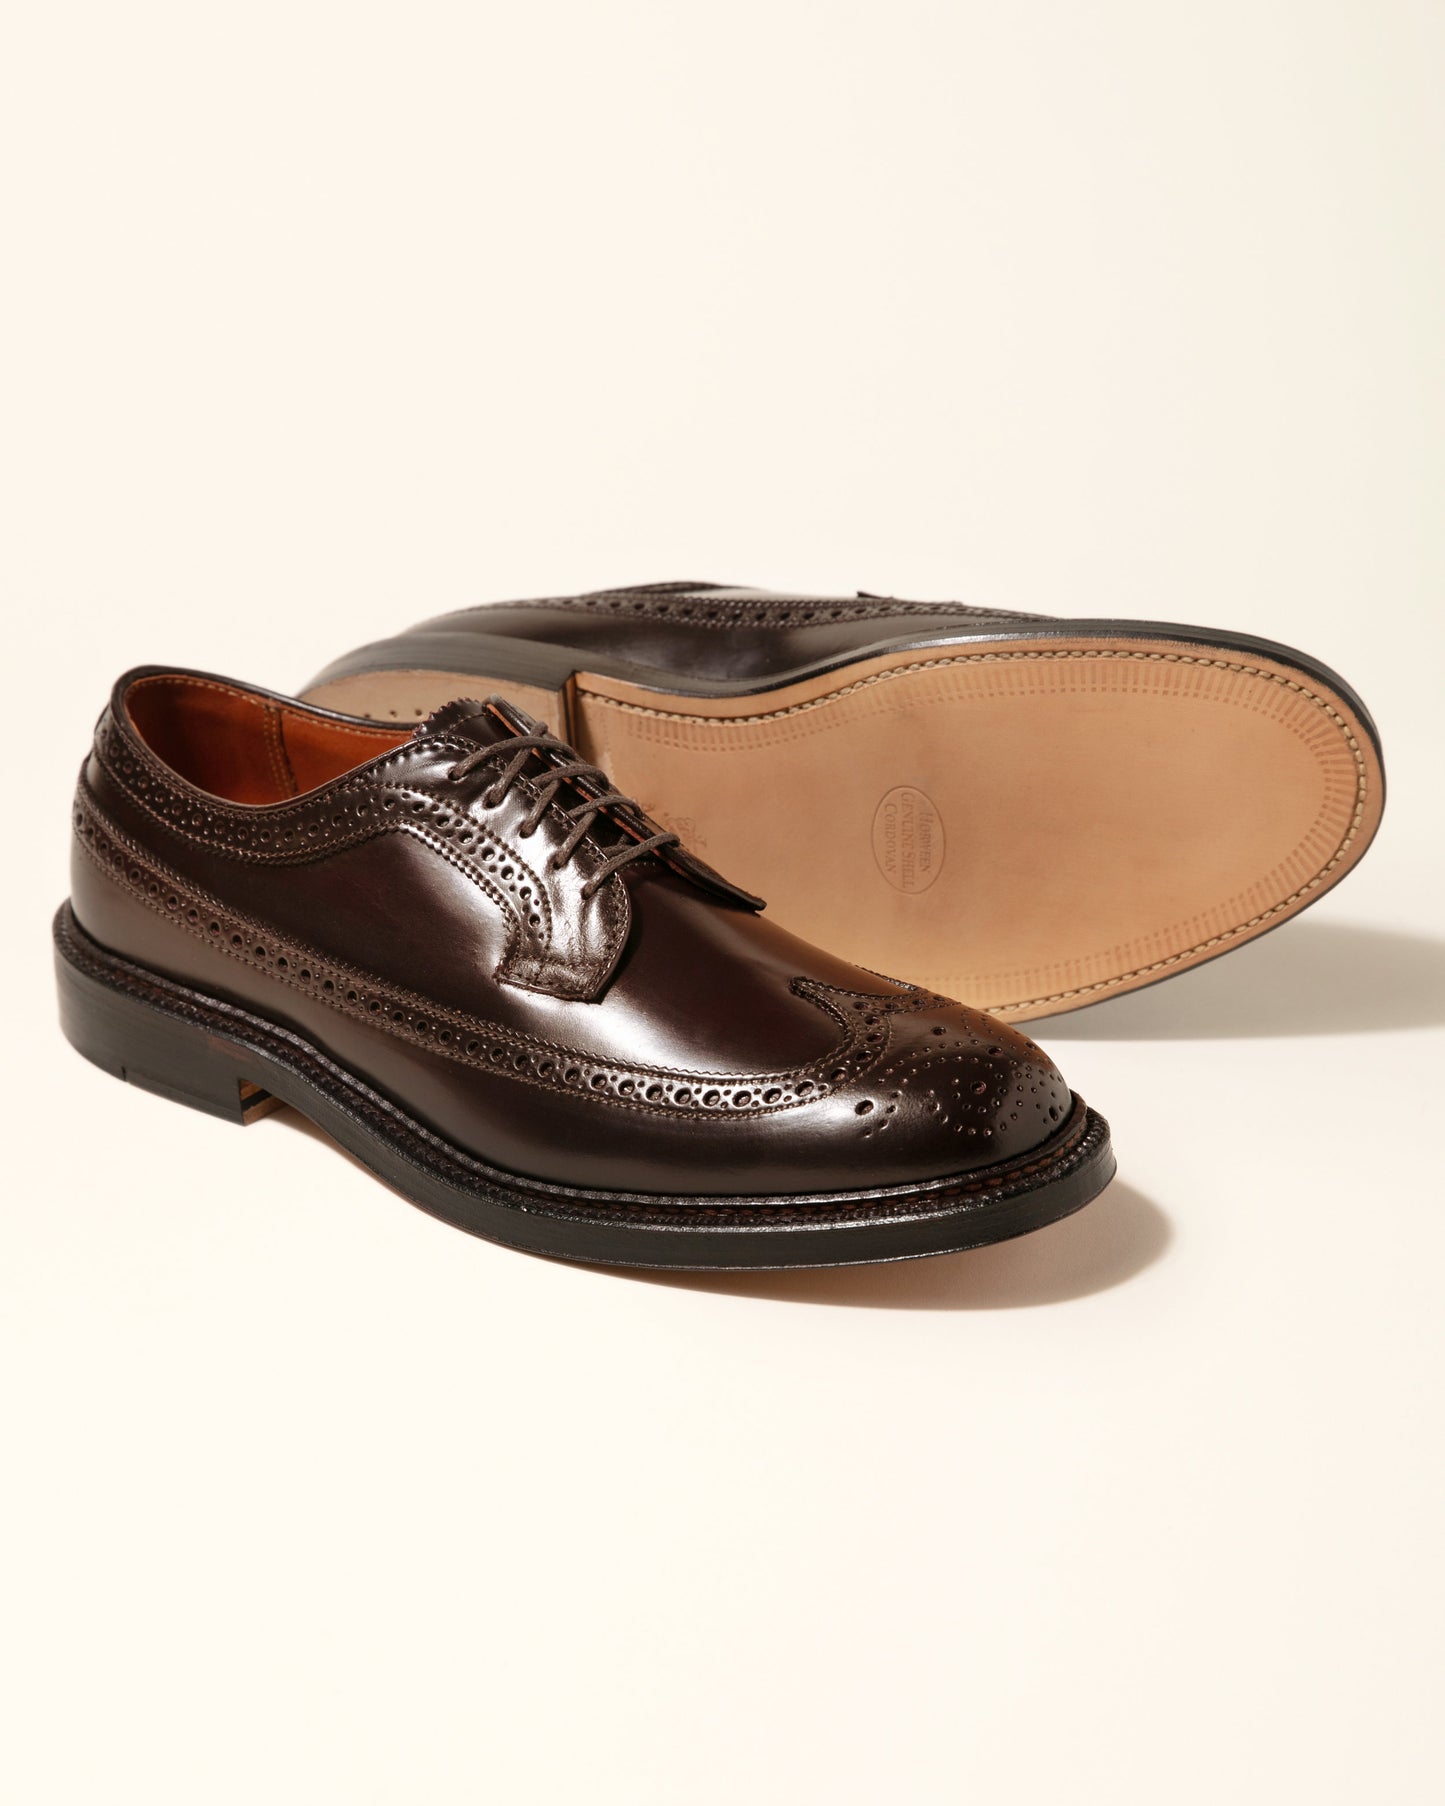 975 Long Wing Blucher in Color 8 Shell Cordovan, Barrie Last